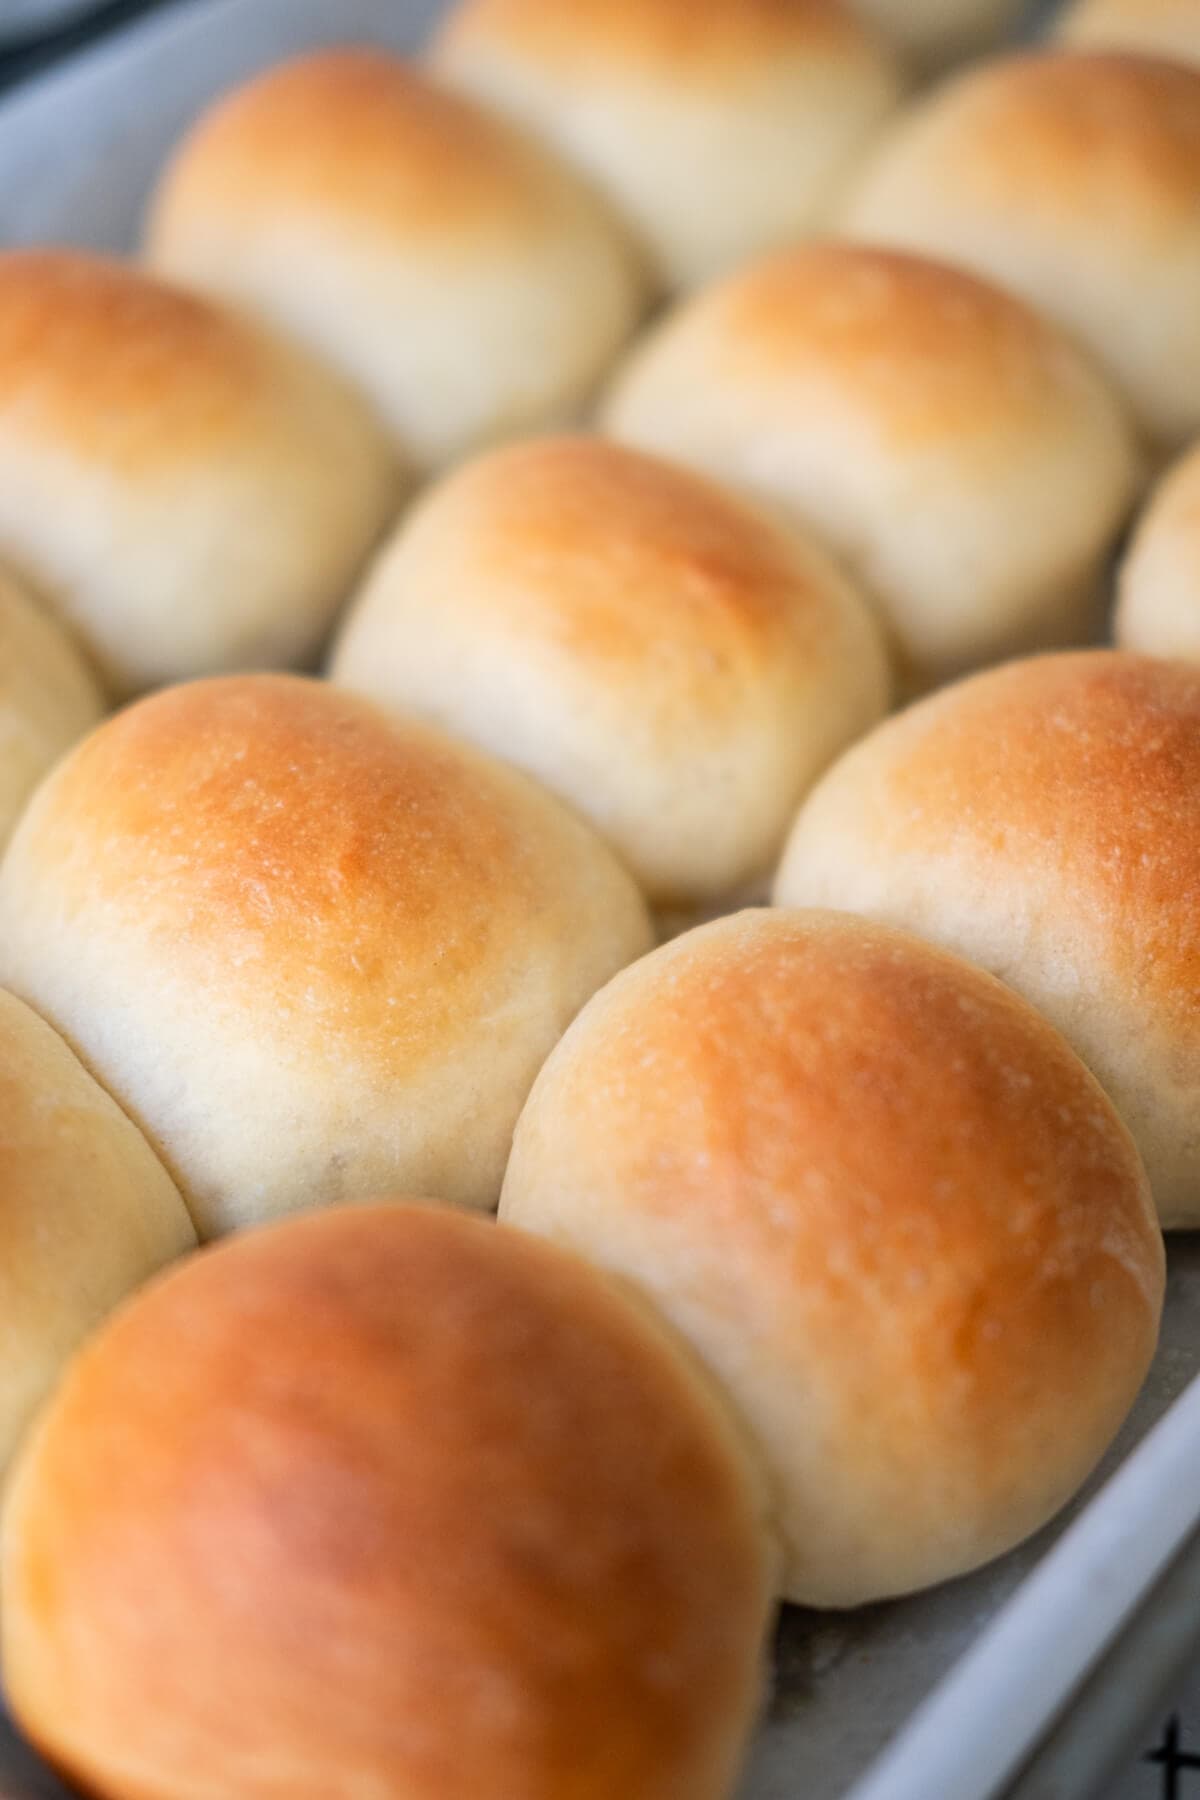 Delicious, soft, buttery round buns with crispy golden brown exterior. 